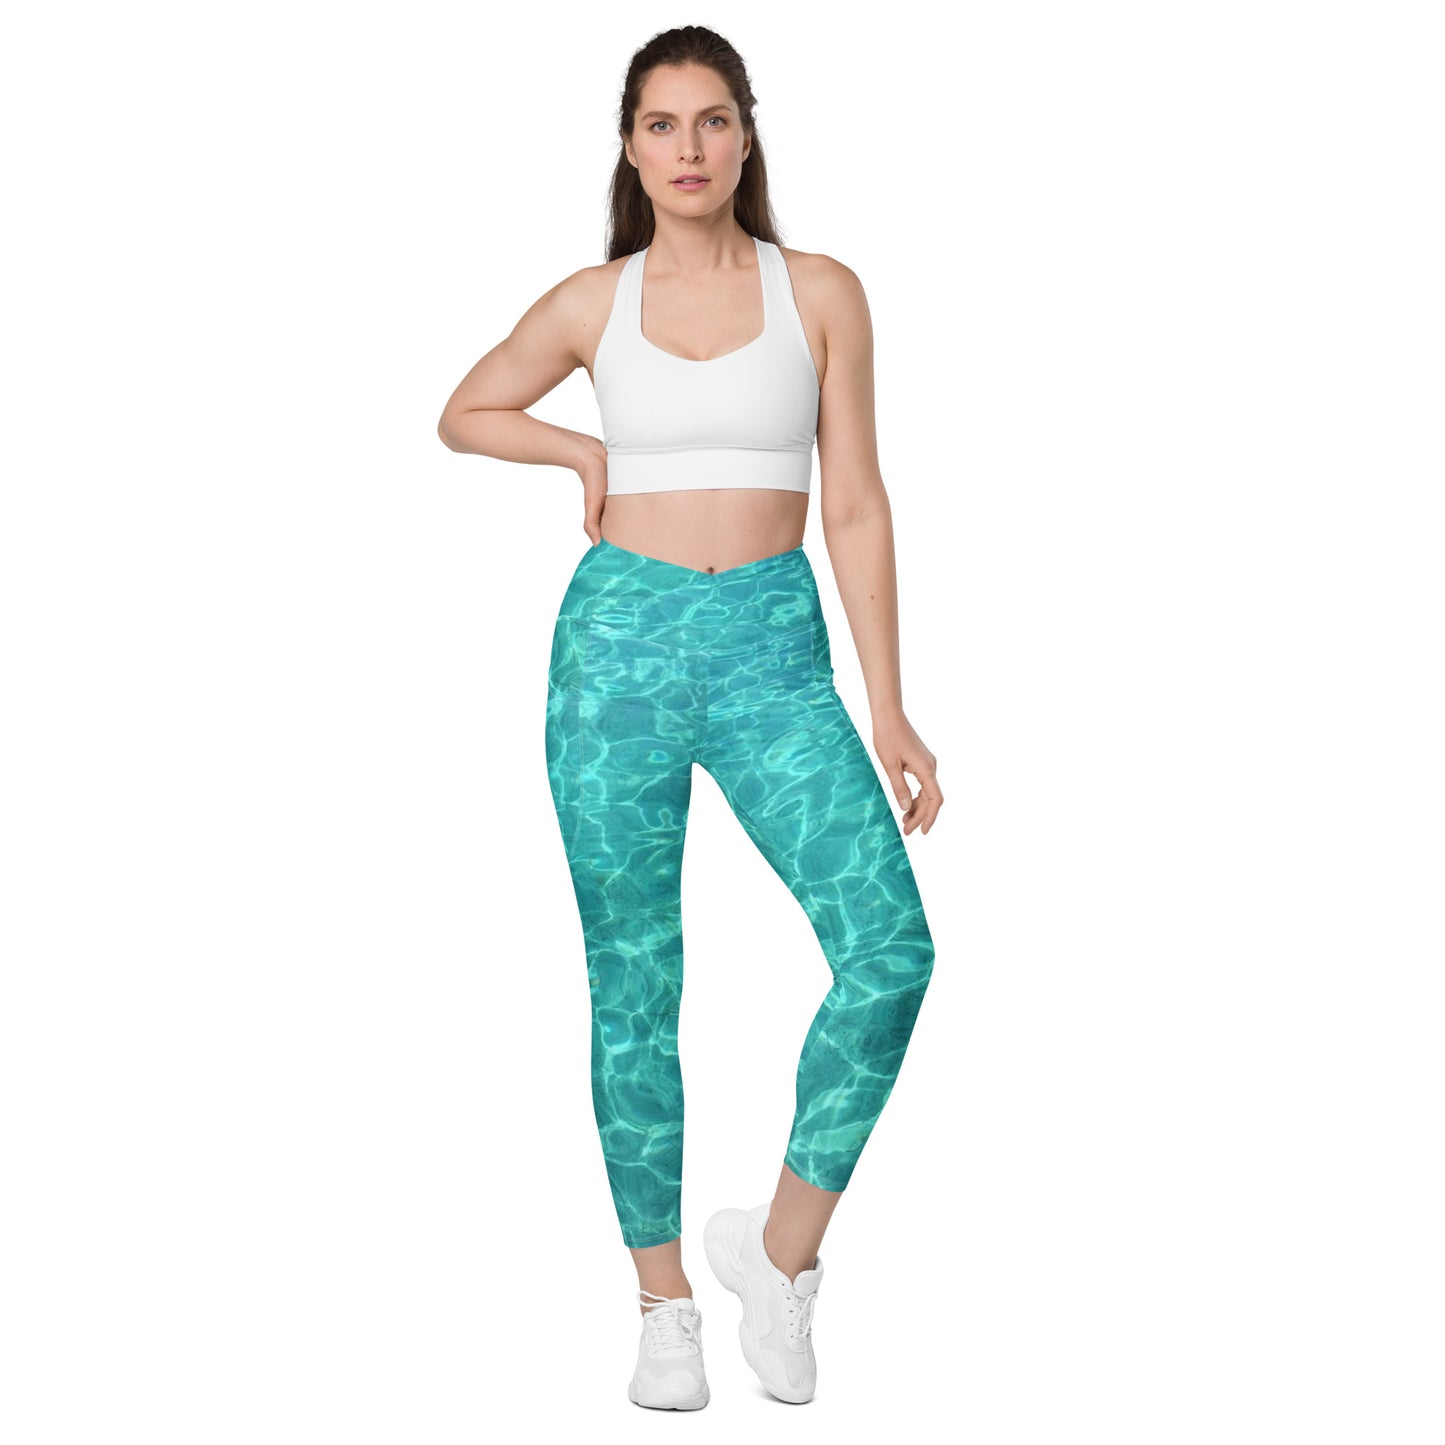 Caribbean Waters - Crossover leggings with pockets - 2XS to 6XL